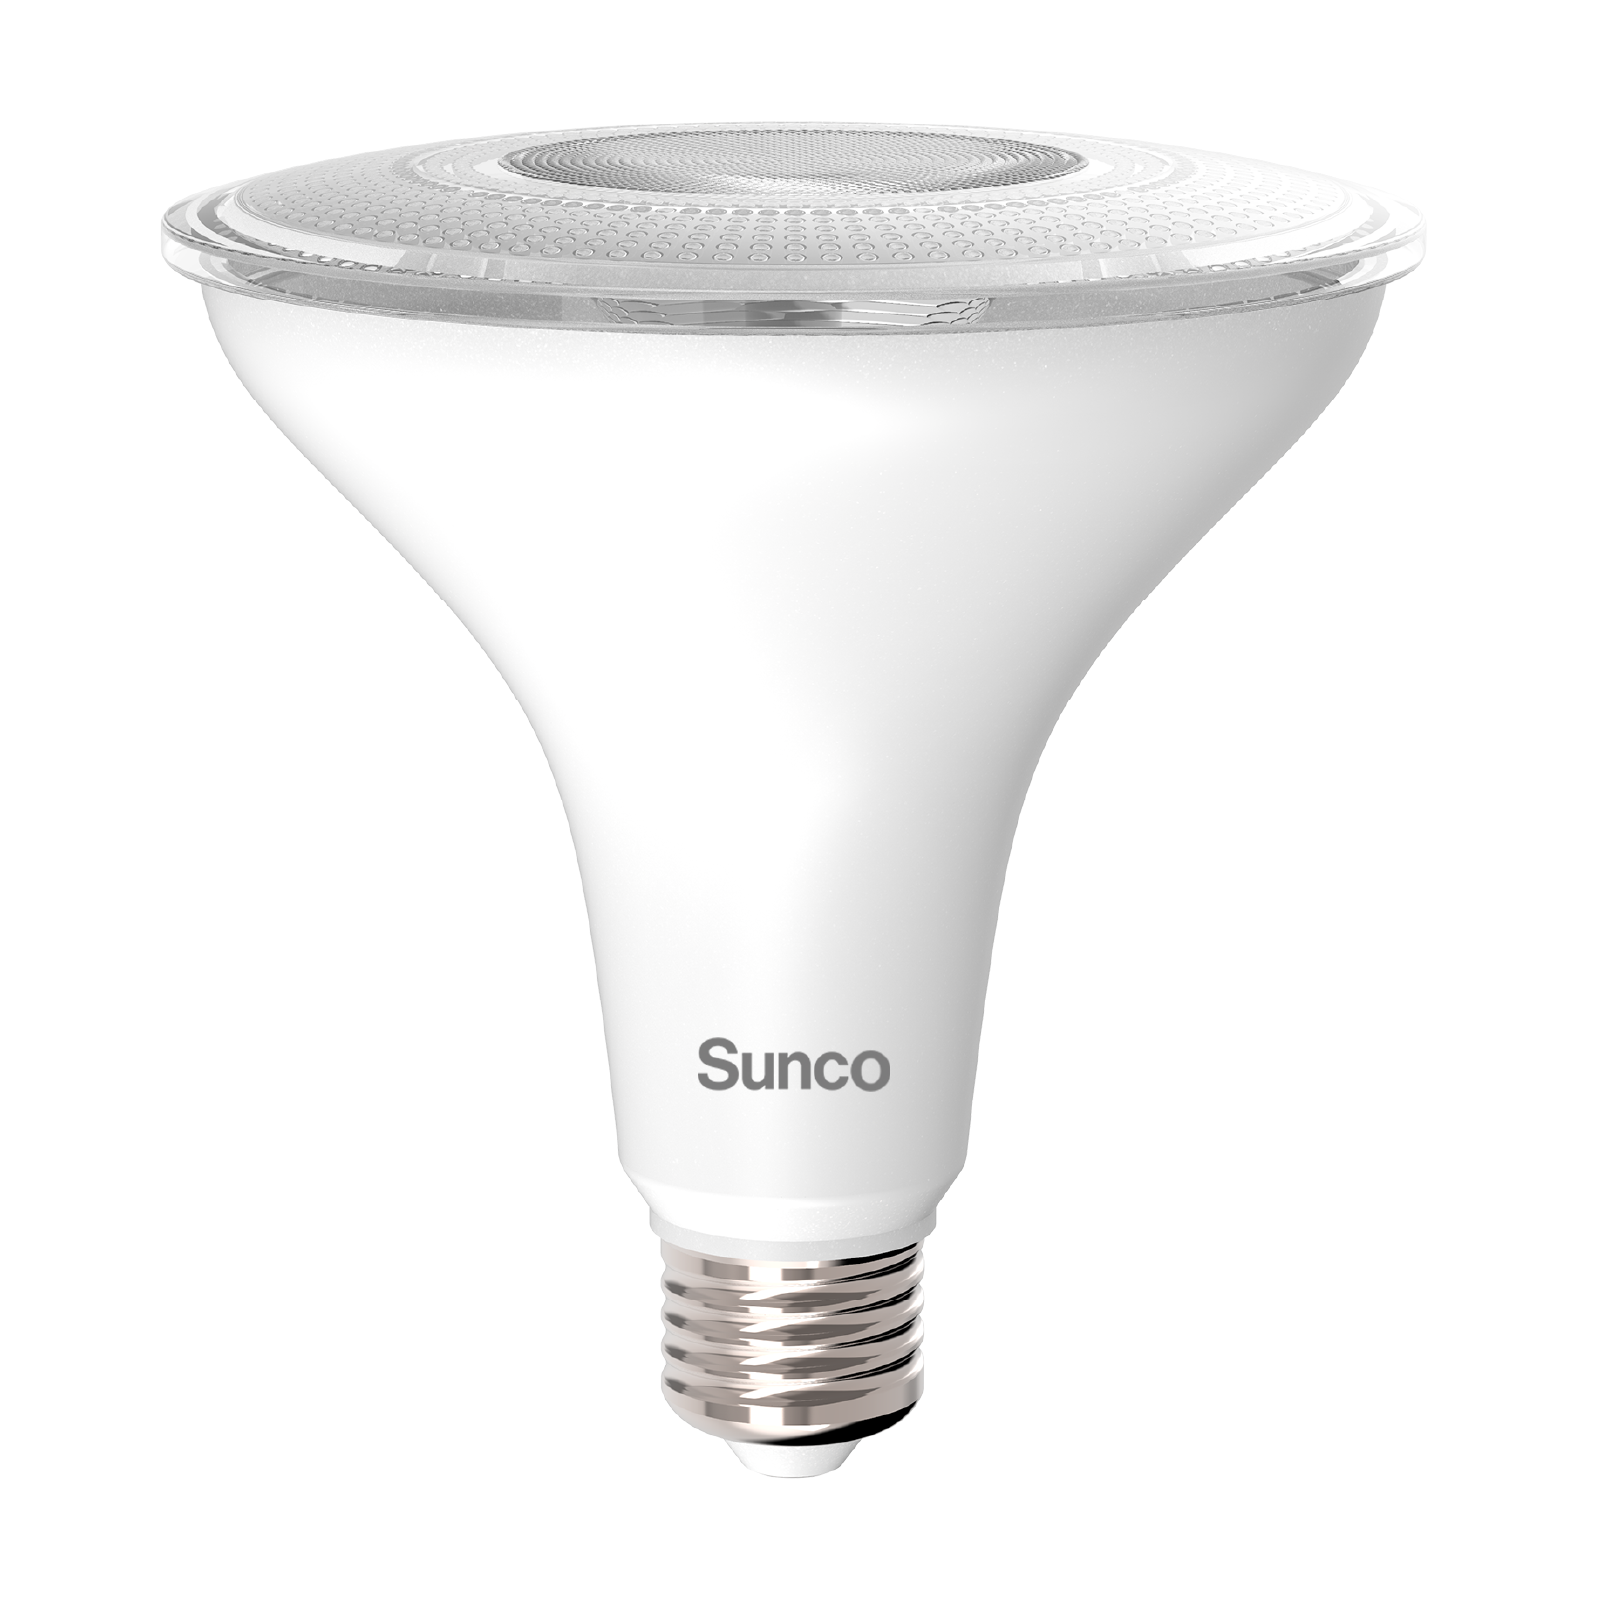 This Sunco PAR38 LED Bulb with an E26 base includes a Dusk to Dawn sensor and a radar motion sensor. The Dusk to Dawn feature means the light will only turn on at night, when no light is detected by the sensor. The radar motion sensor means that, if no light is detected, the sensor will detect motion within 15ft and turn on when needed. The light will then stay on while motion continues, but will stop after 25 seconds of no detected motion. Bulb is a spotlight with a 40-degree beam angle.